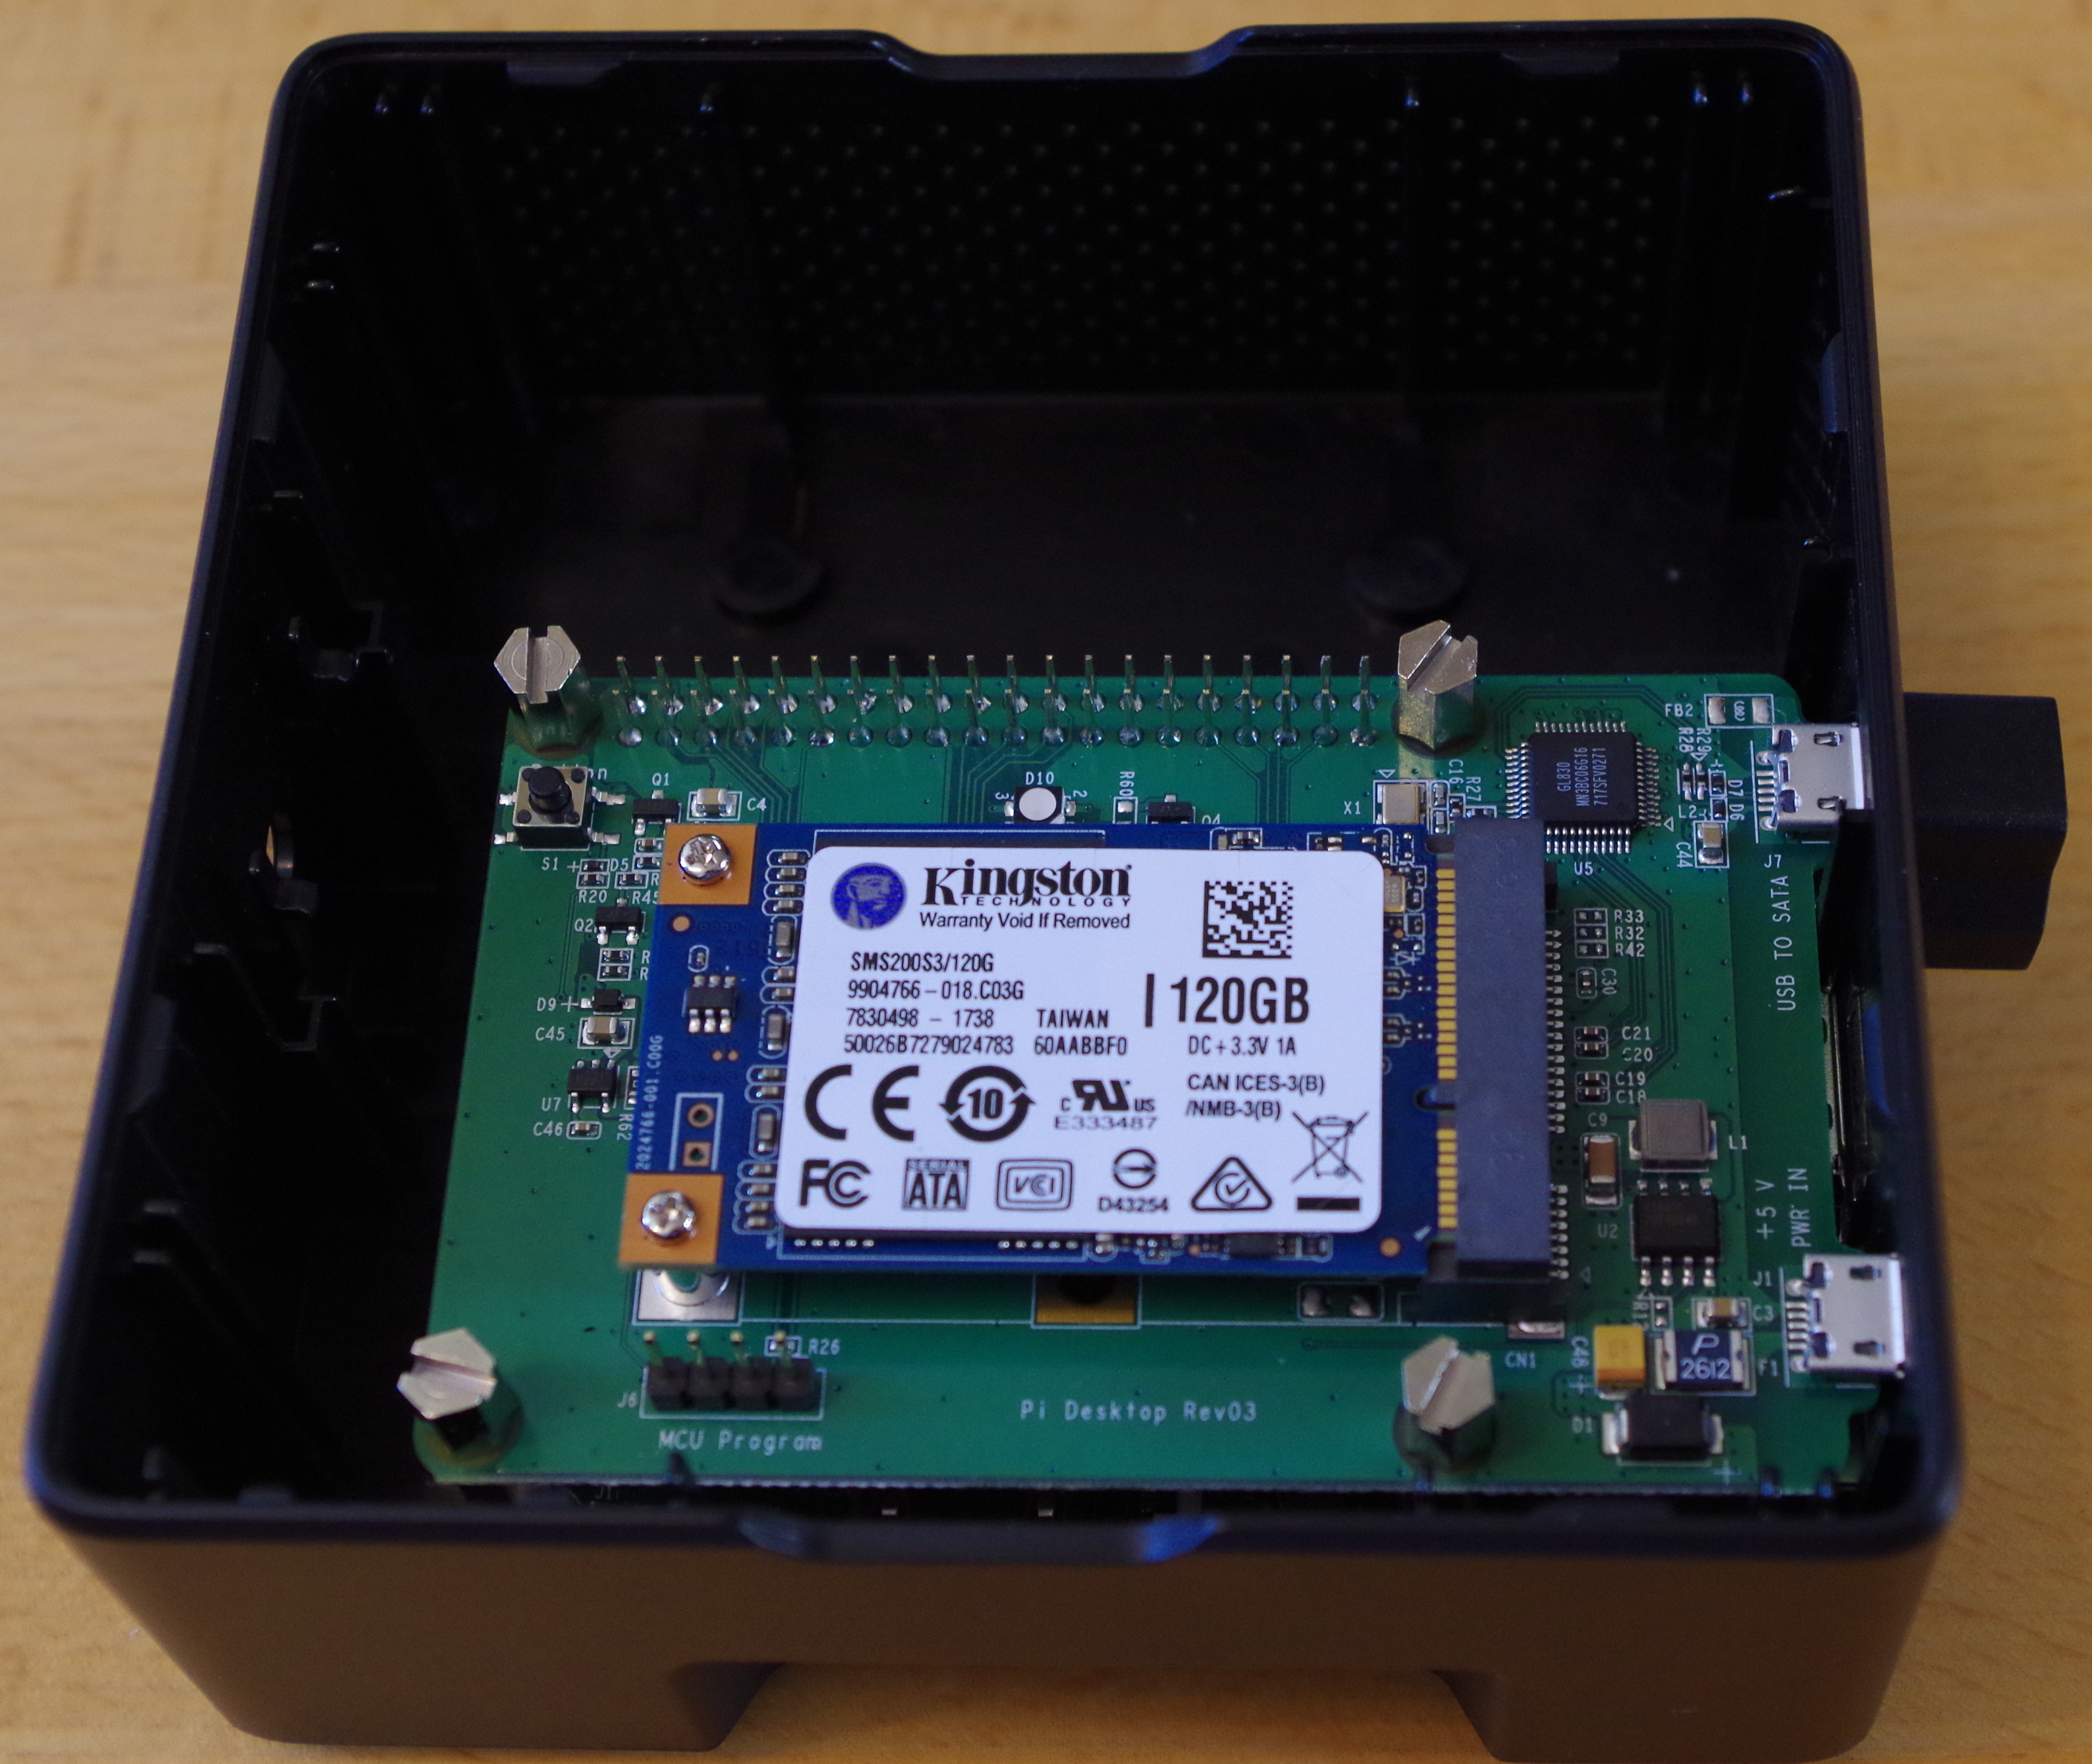 How to Boot a Raspberry Pi From SSD and Use It for Permanent Storage